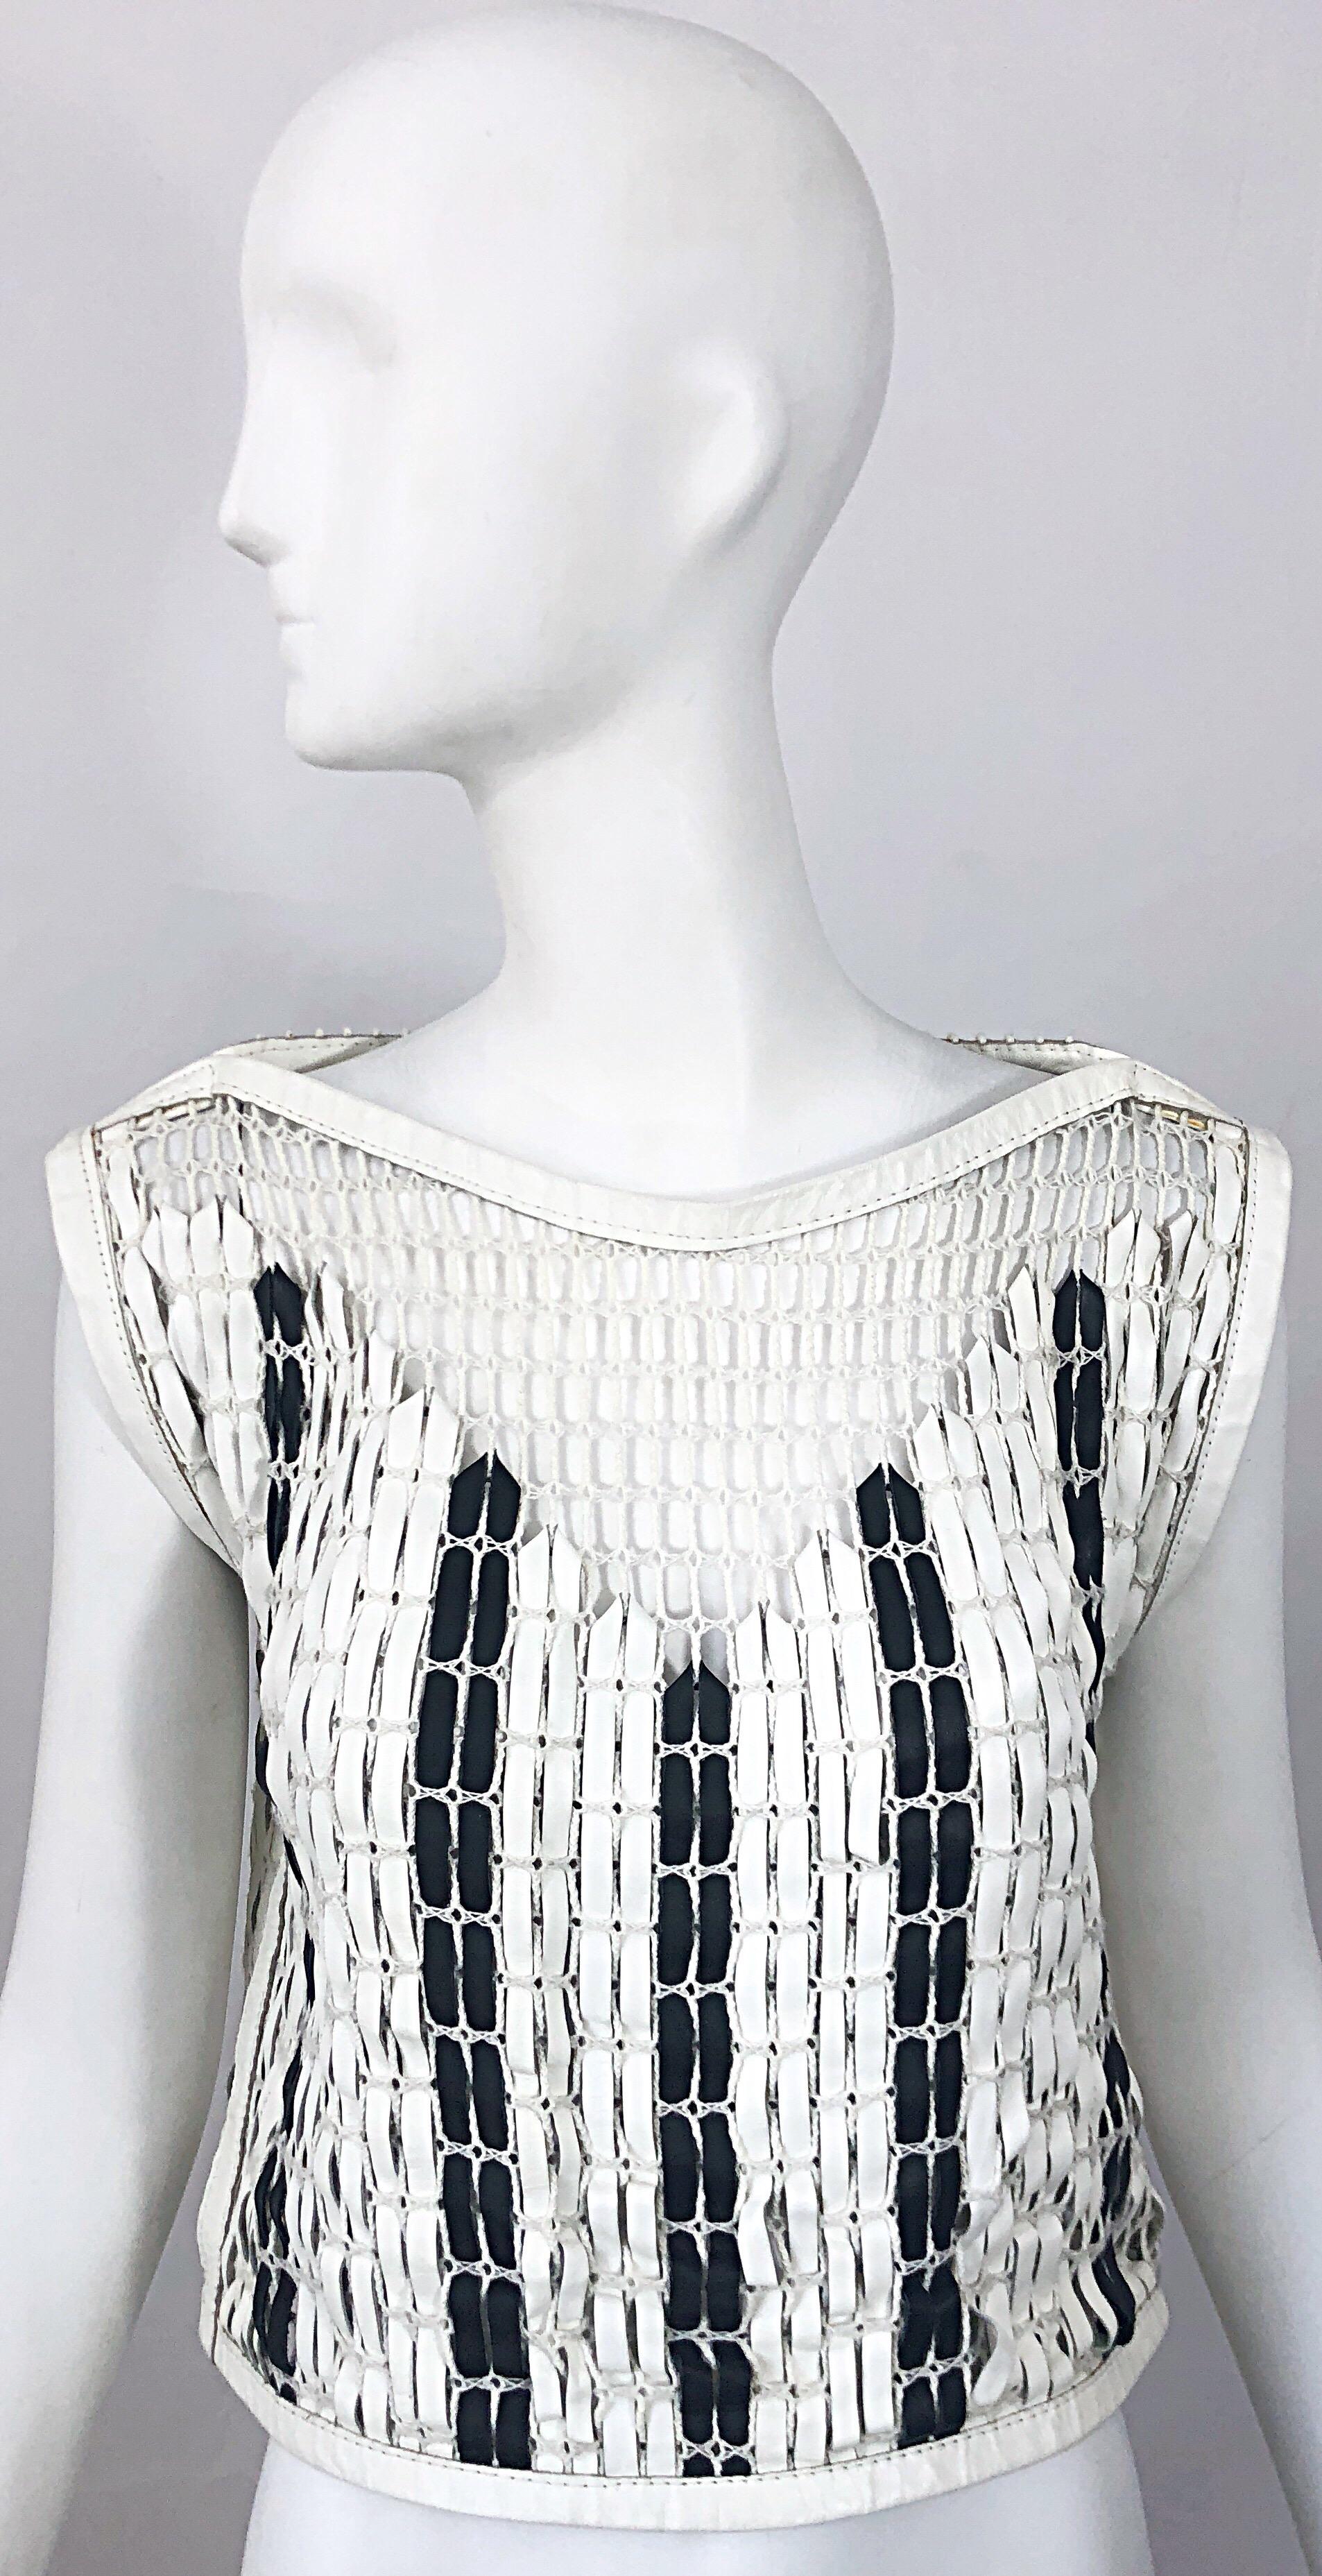 Amazing early / mid 2000s vintage BOTTEGA VENETA black and white leather + cotton woven crop top! Believed to be an original sample of the premiere ready to wear collection in 2005, when Bottega Veneta debuted their first ready to wear women's line.